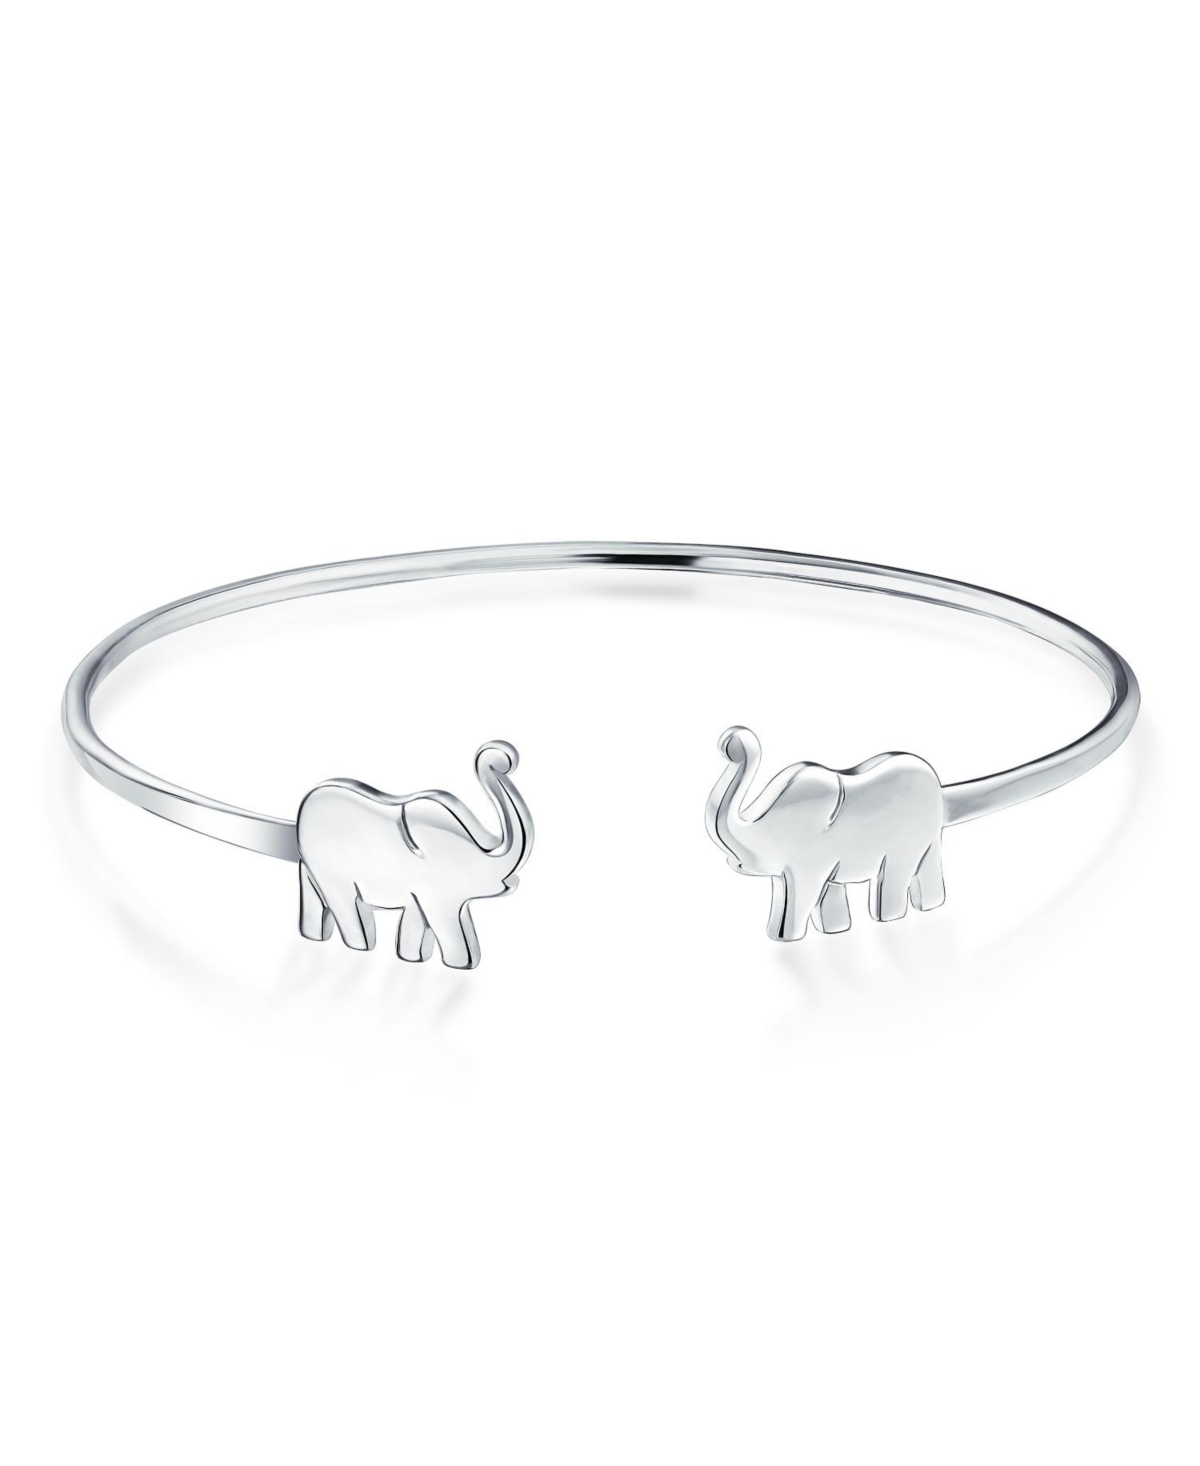 Minimalist Thin Delicate Zoo Animal Lucky Good Luck Elephant Bangle Cuff Bracelet For Women Teen .925 Sterling Silver - Silver